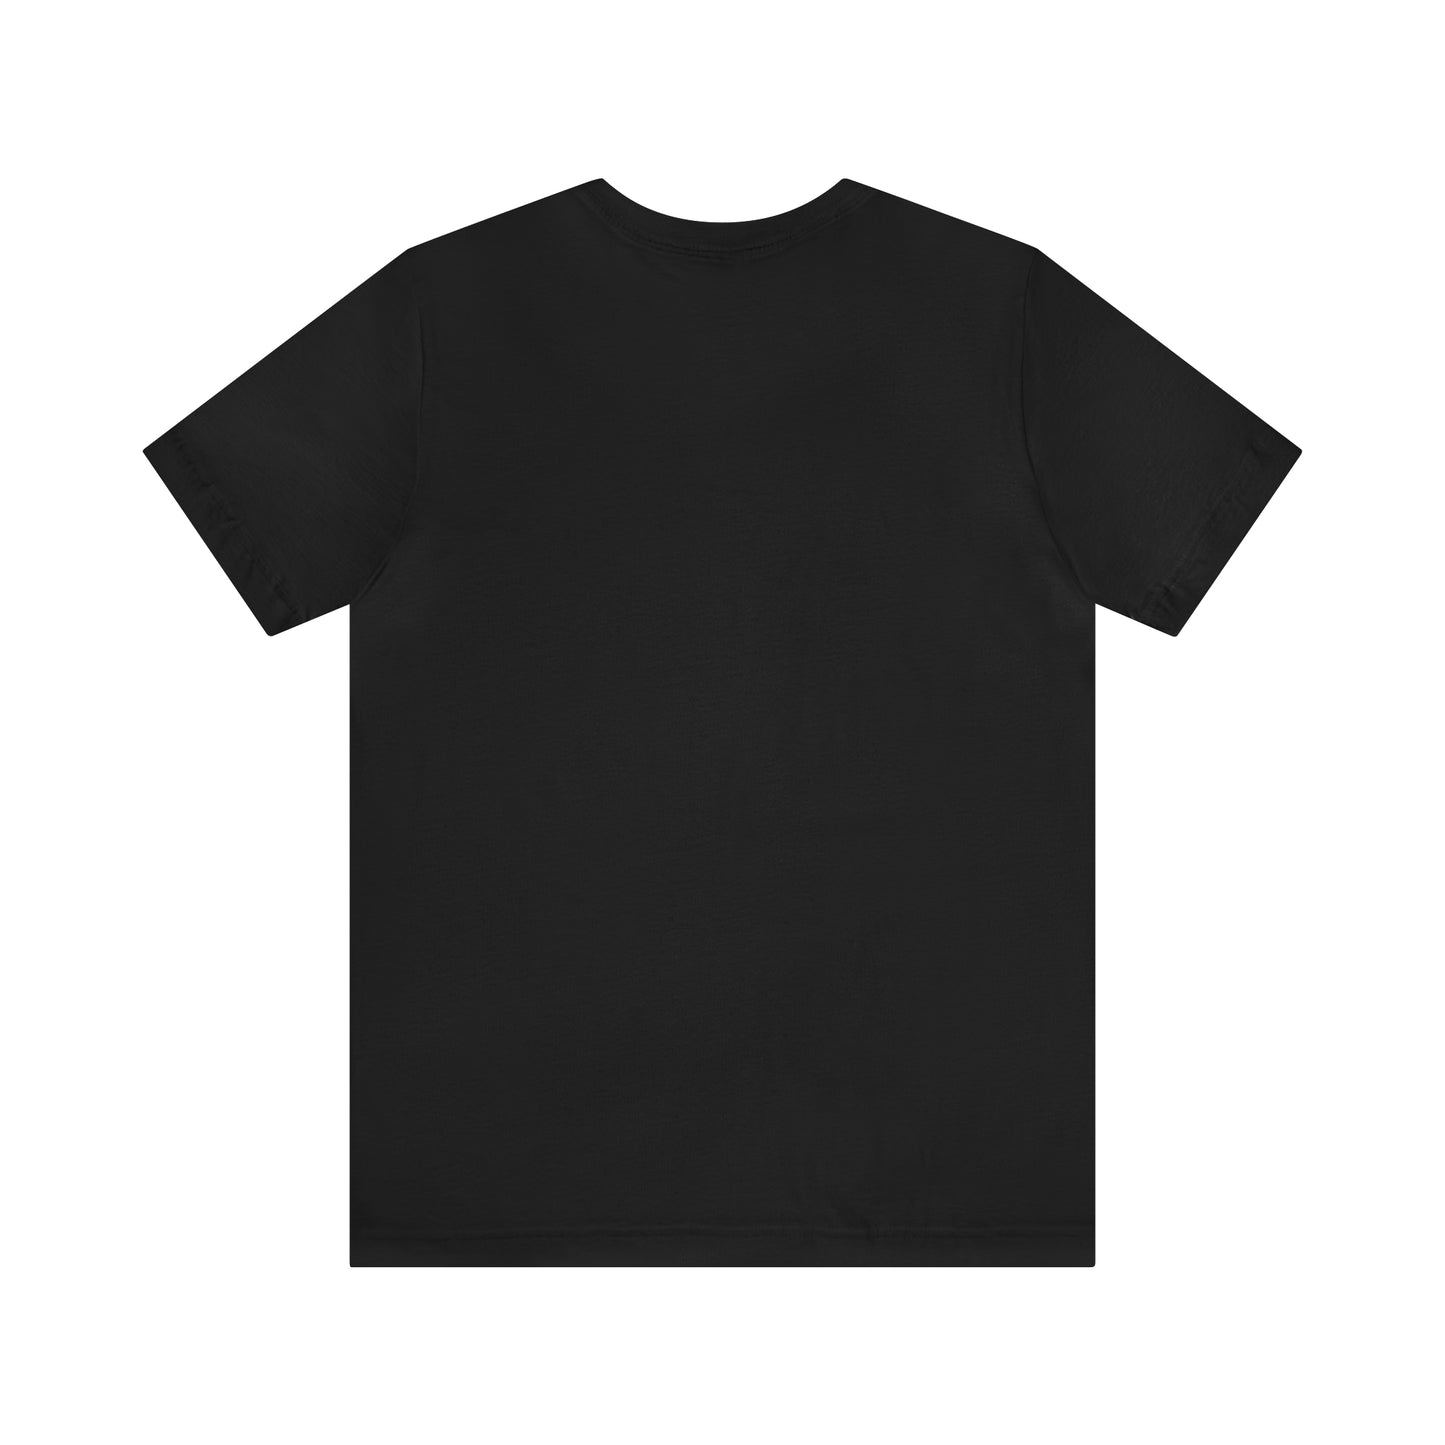 Jumping Tot (Black Outfit) - Unisex Jersey Short Sleeve Tee